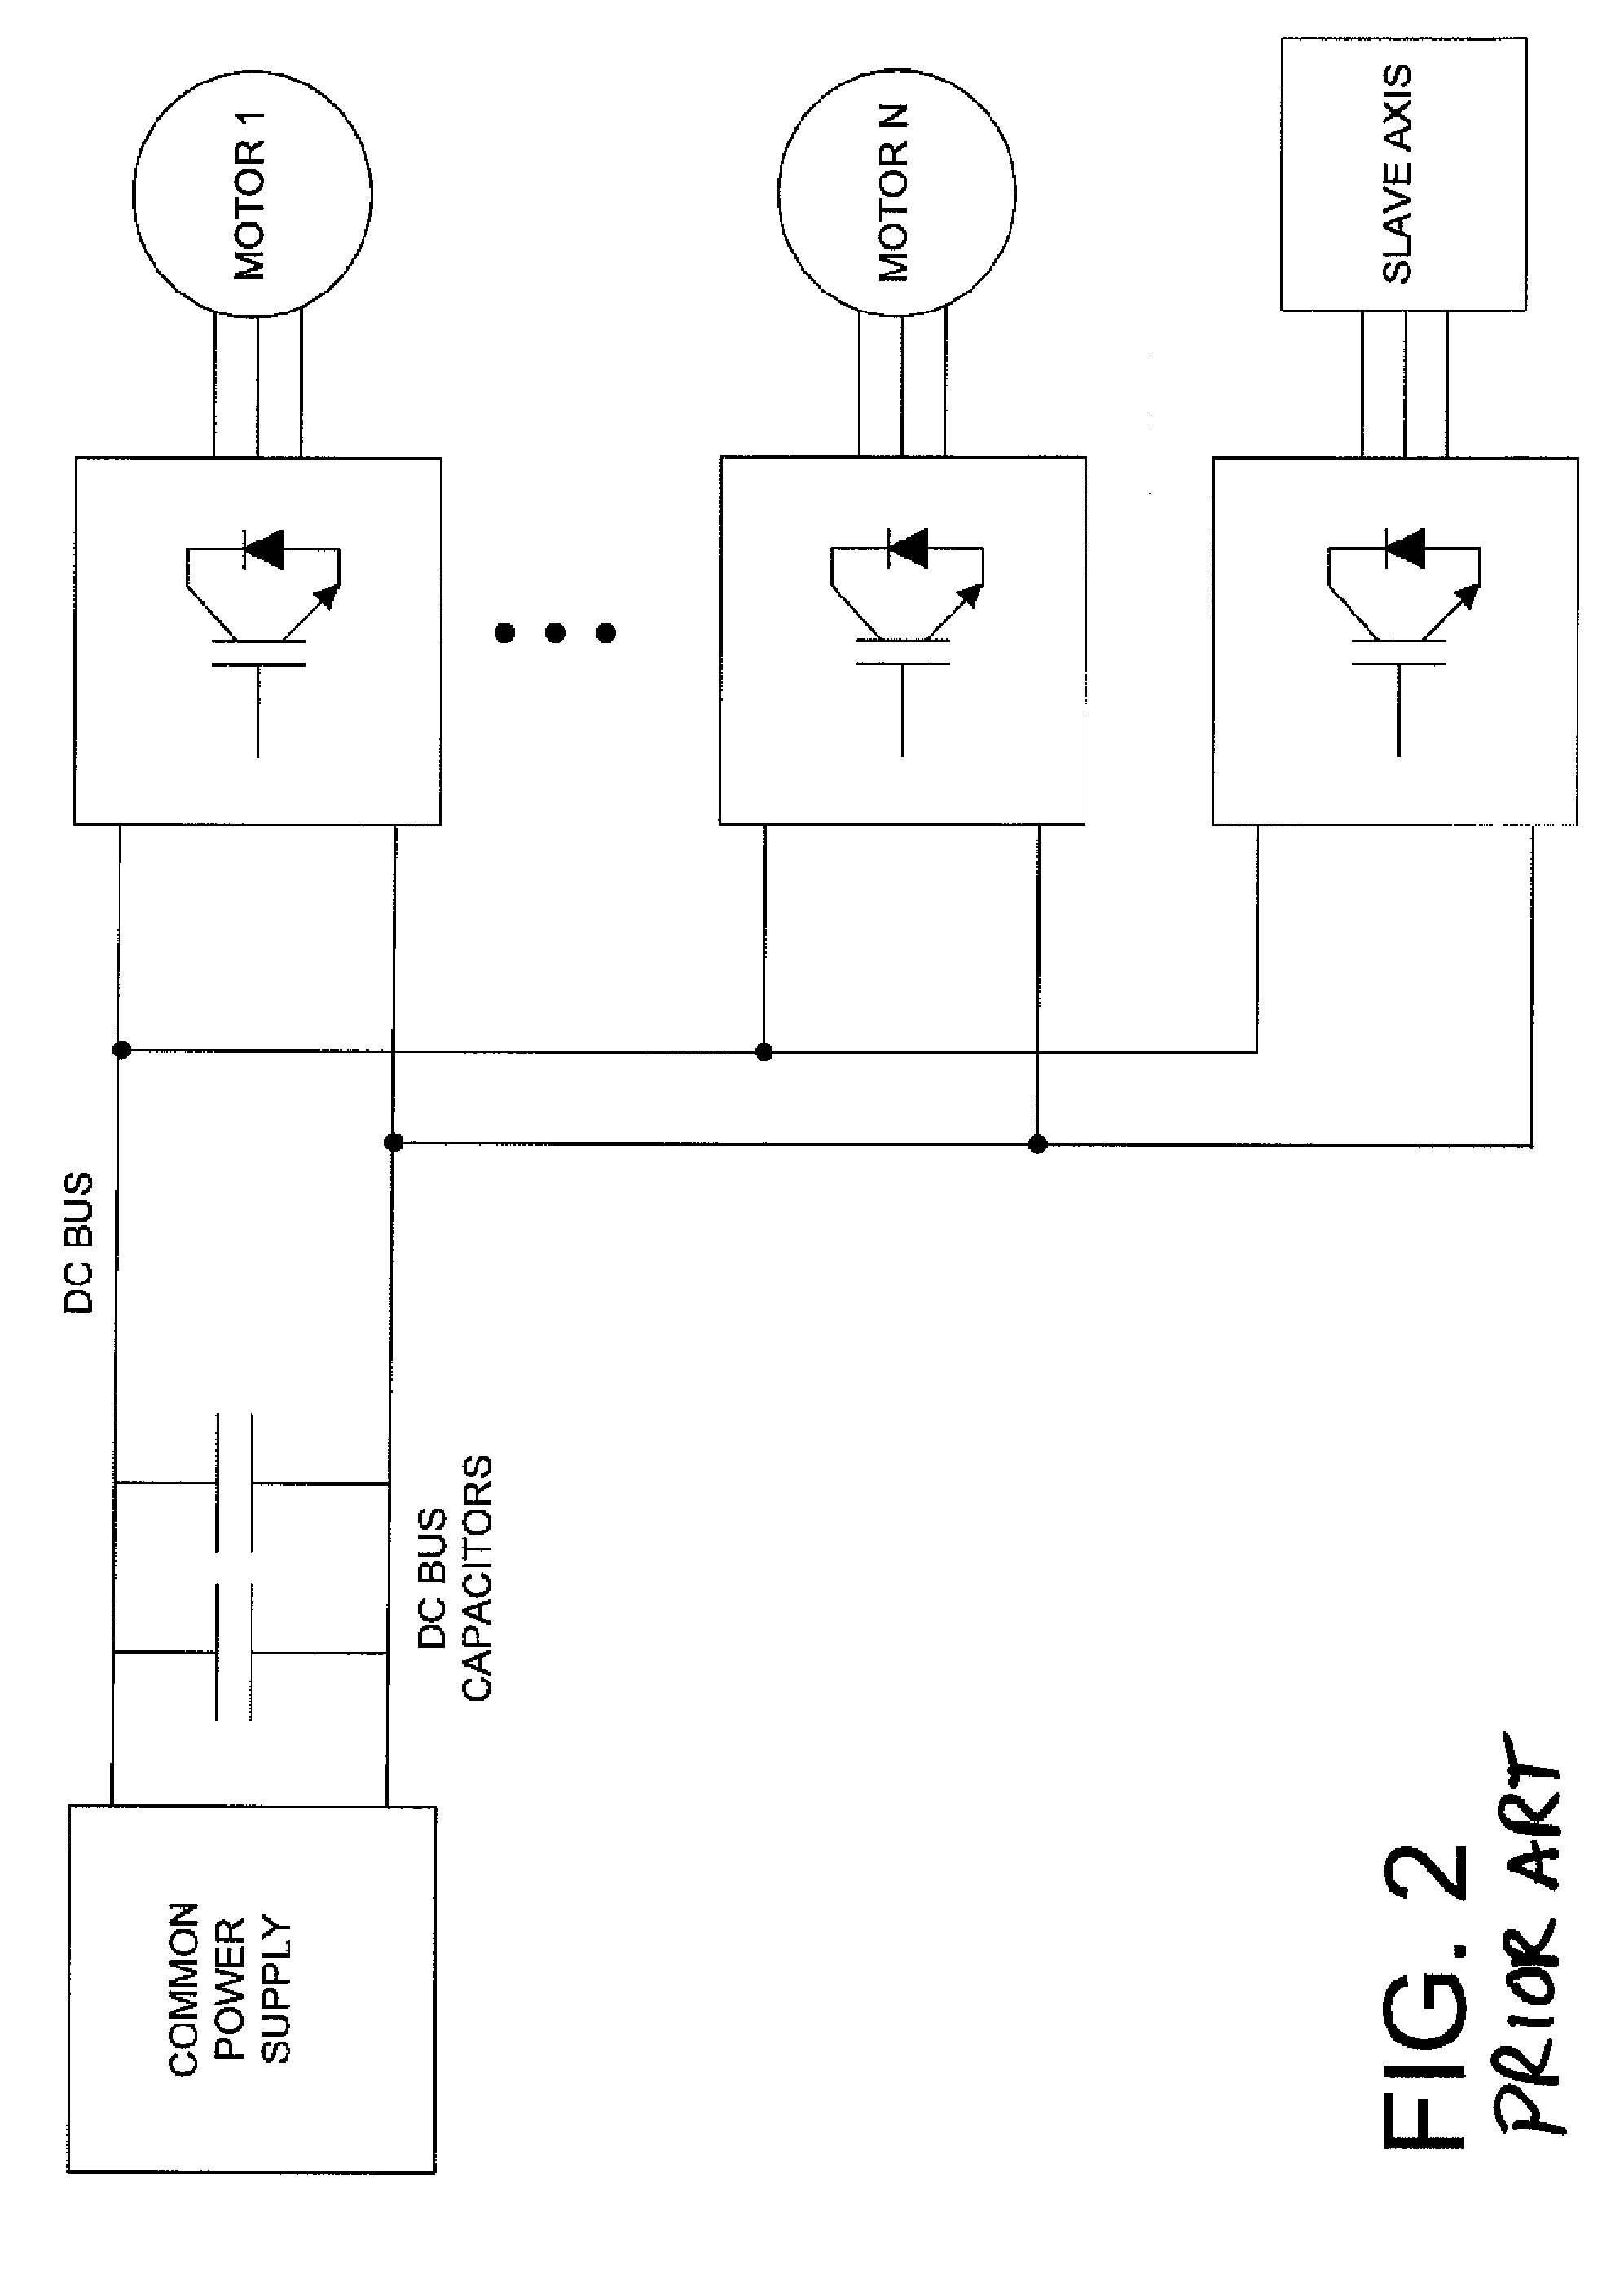 System and method for regenerative energy control when multiple motors share a common power supply